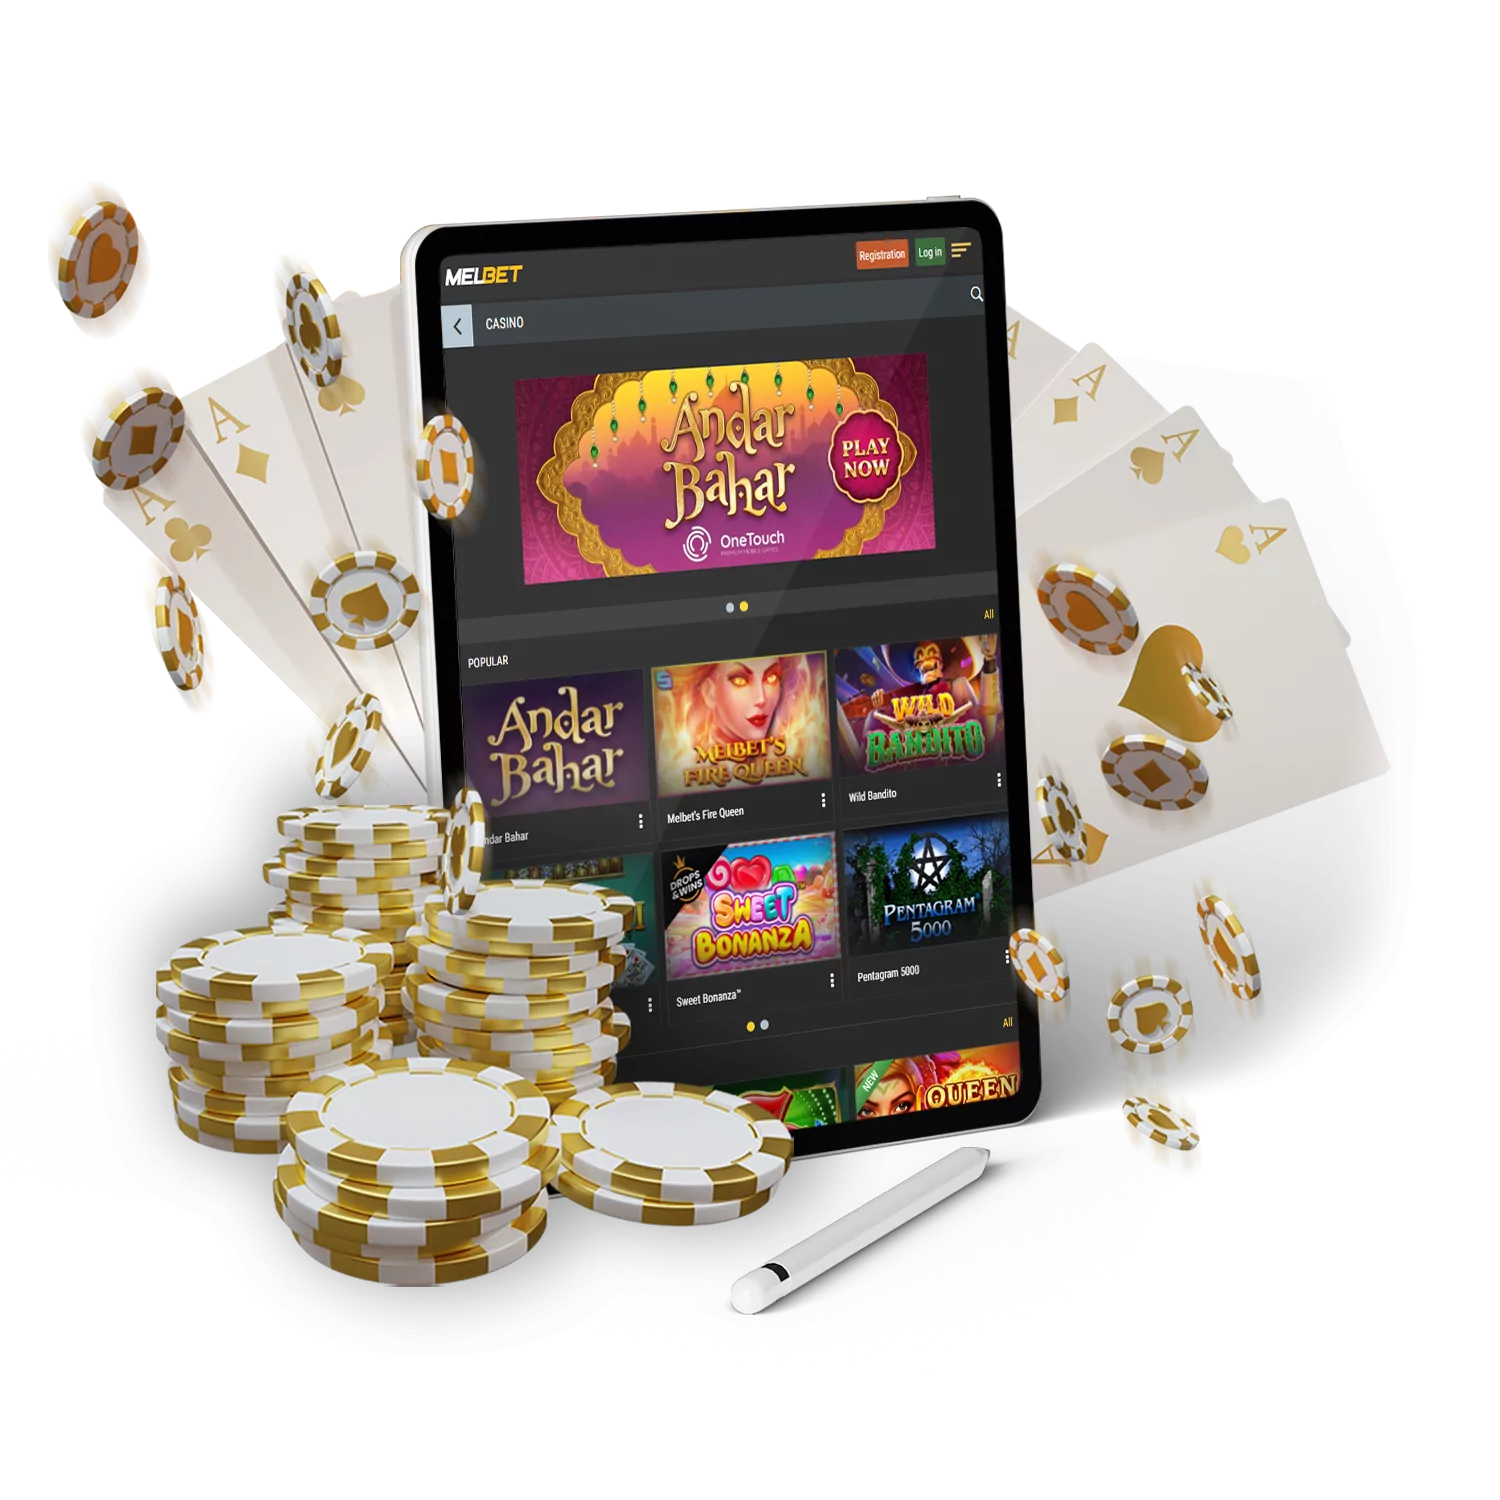 Learn what games you can play at the Melbet Casino and Live Casino.